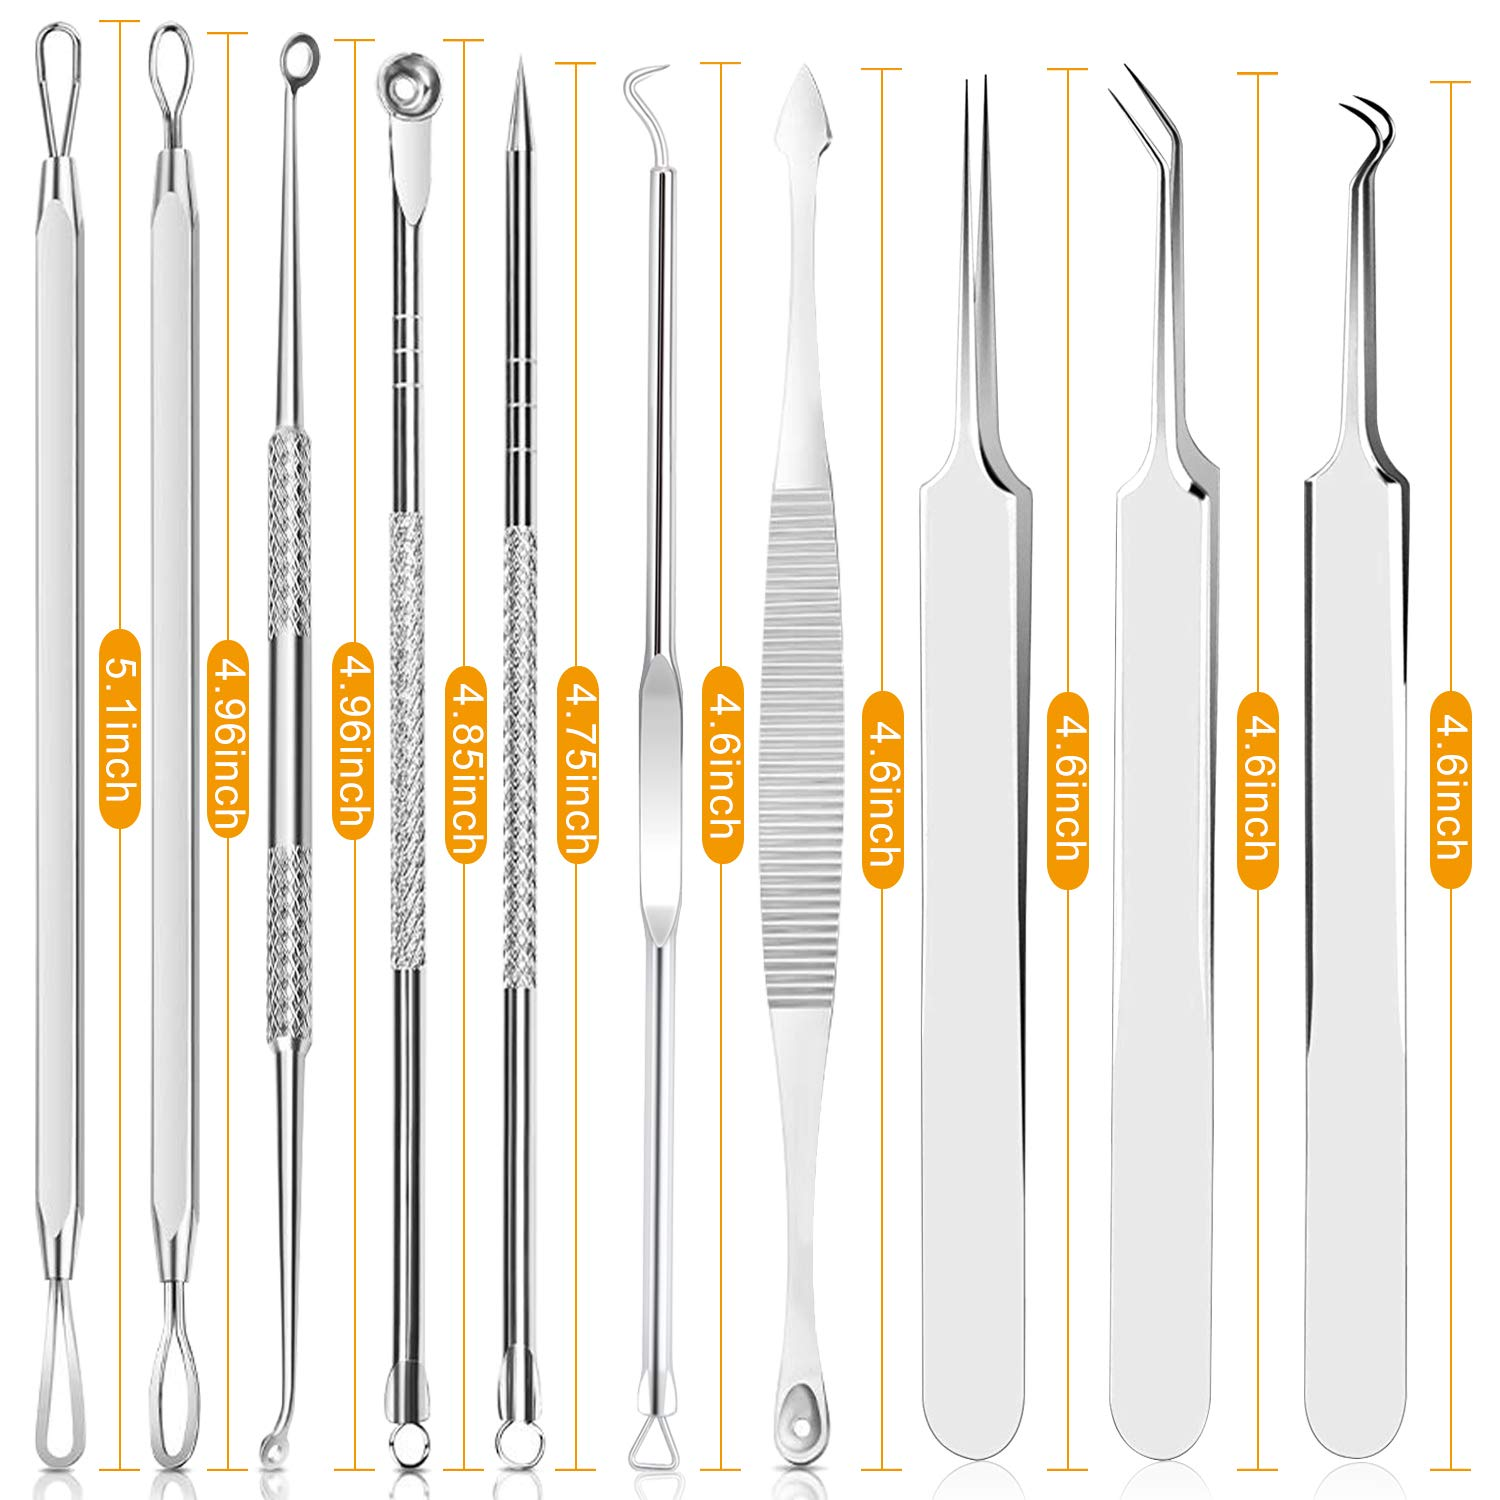 Blackhead Remover Tool, 10 Pcs Professional Pimple Comedone Extractor Popper Tool Acne Removal Kit - Treatment for Pimples, Blackheads, Zit Removing, Forehead,Facial and Nose(Silver) - image 3 of 8